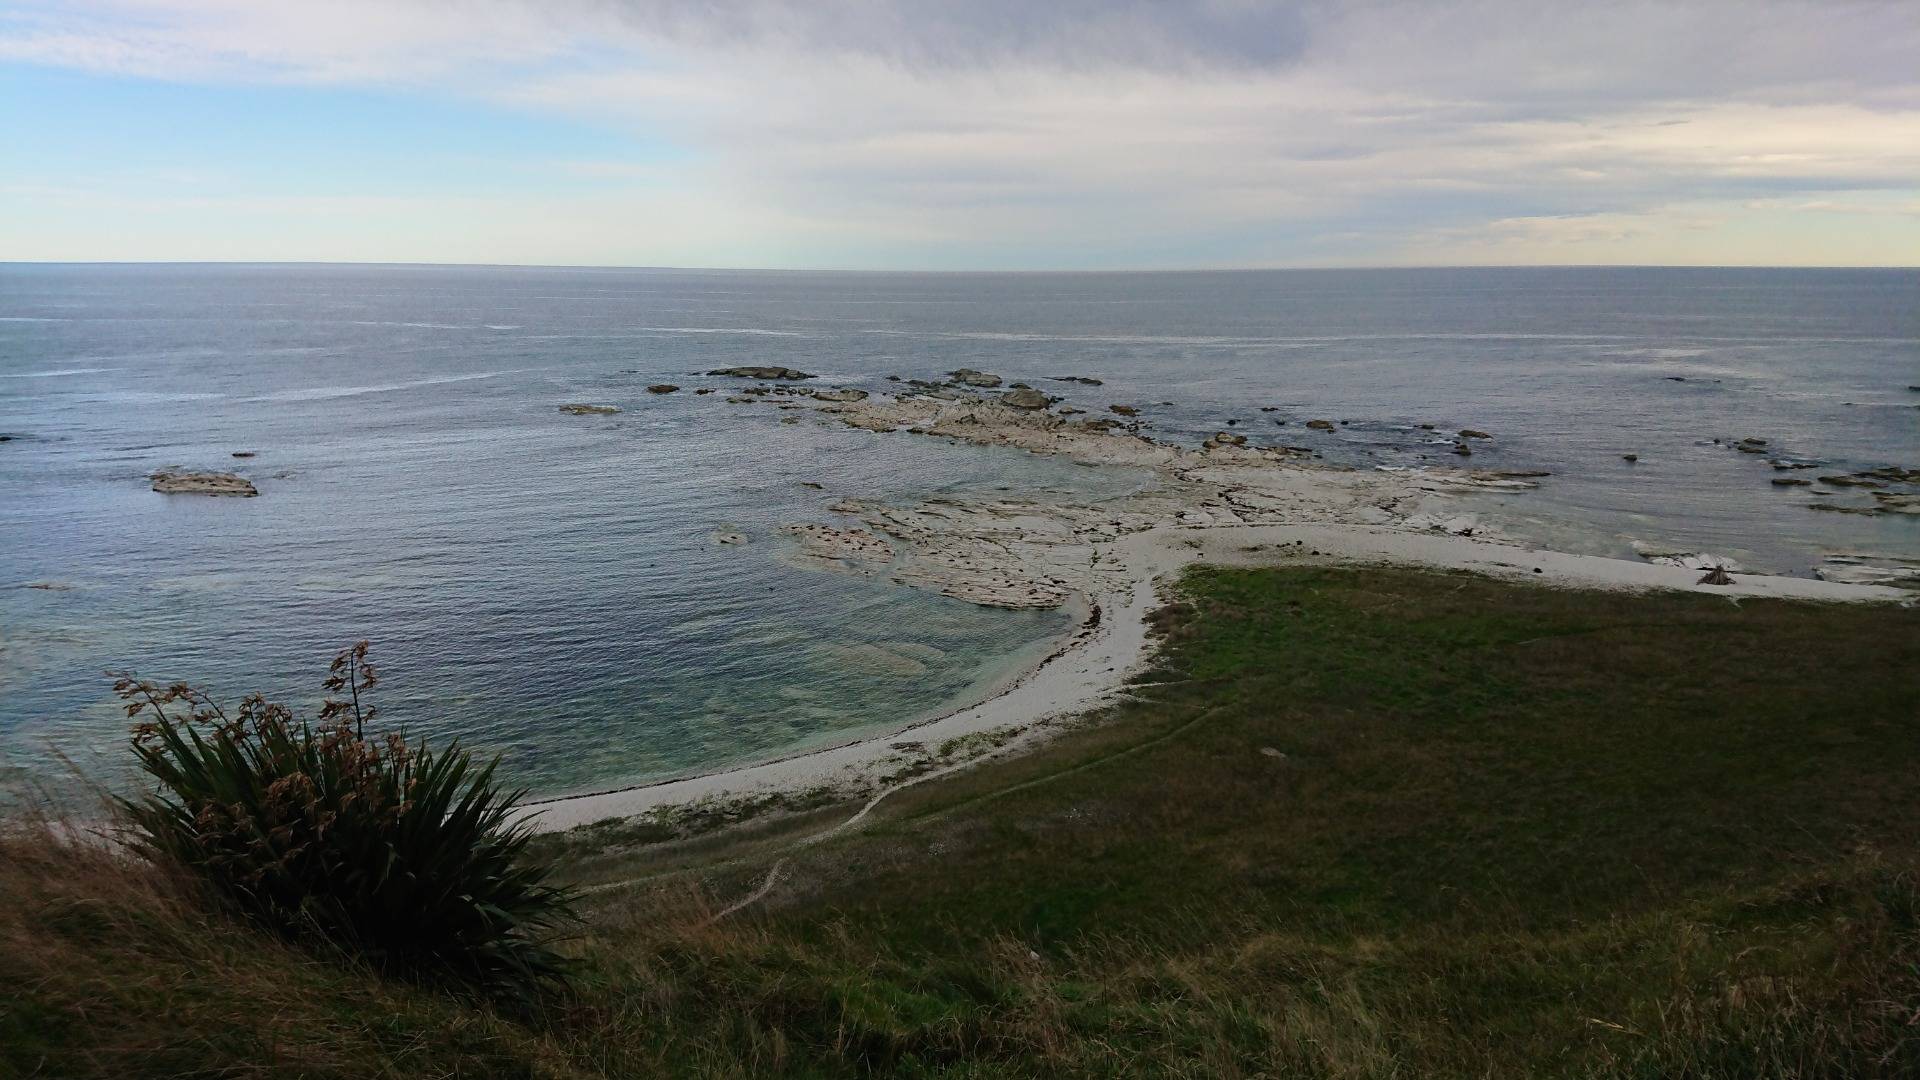 Down there is Point Kean seal colony!